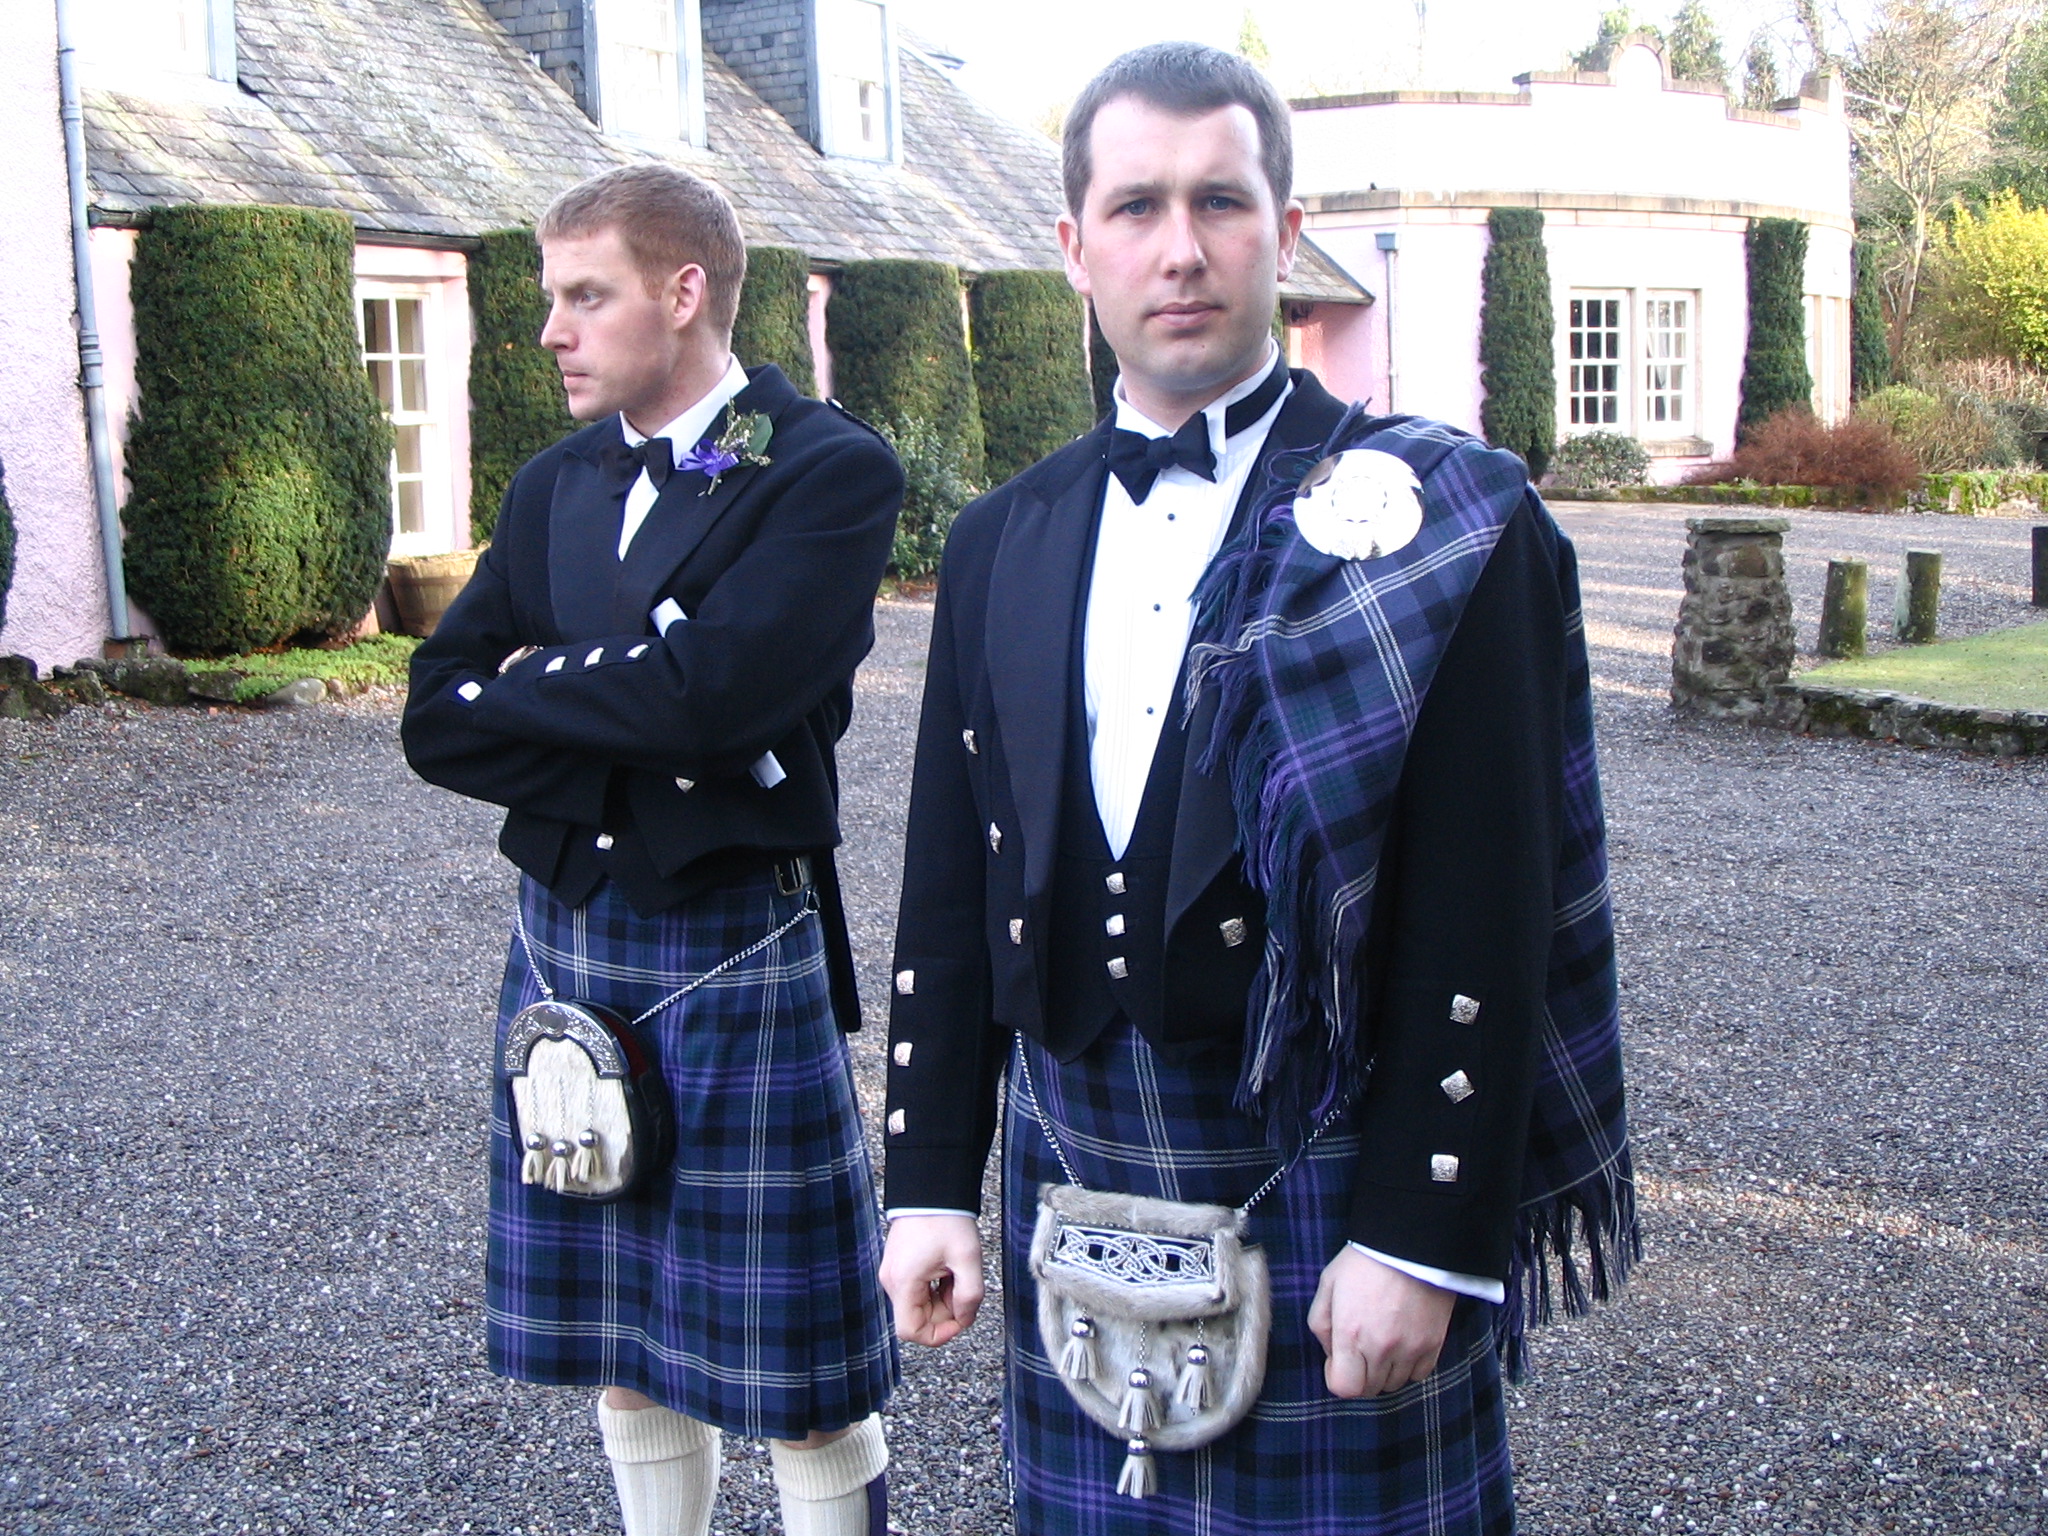 two men are wearing kilts outside, one is in a blue suit and the other in a white shirt